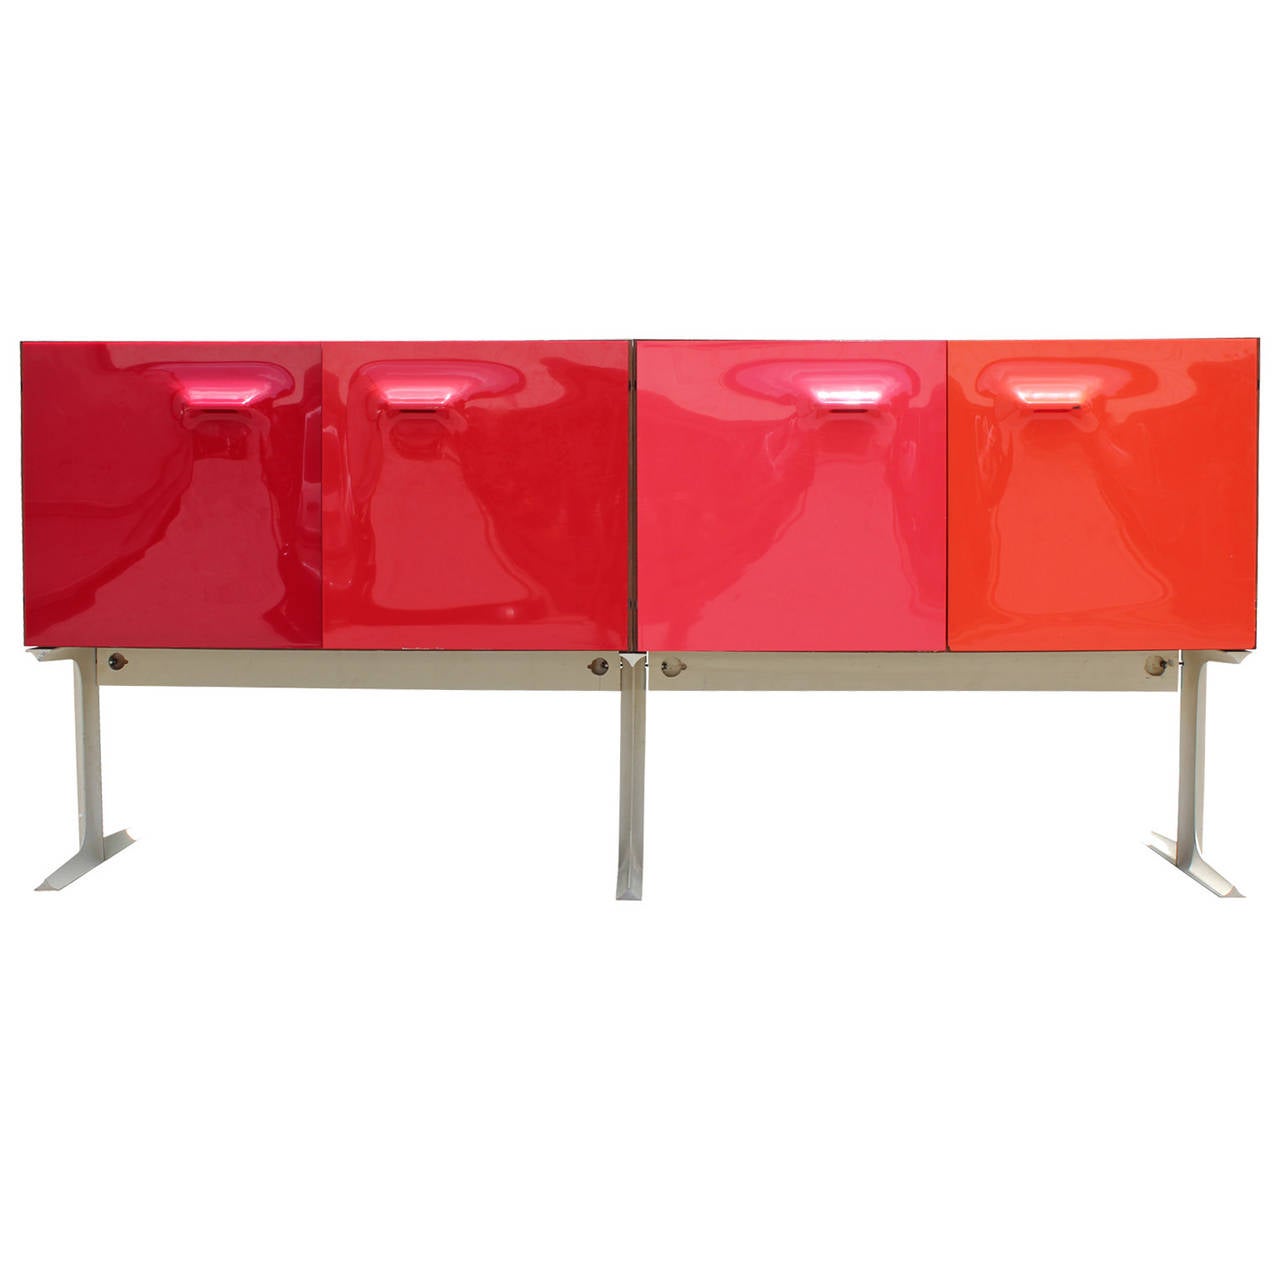 Rare double sided cabinet or sideboard by Raymond Loewy. Four bold colored plastic doors line either side of the piece. Doors range in color from red to pink to orange and open to reveal lemon yellow shelves and a white drink caddy.  Metal base is